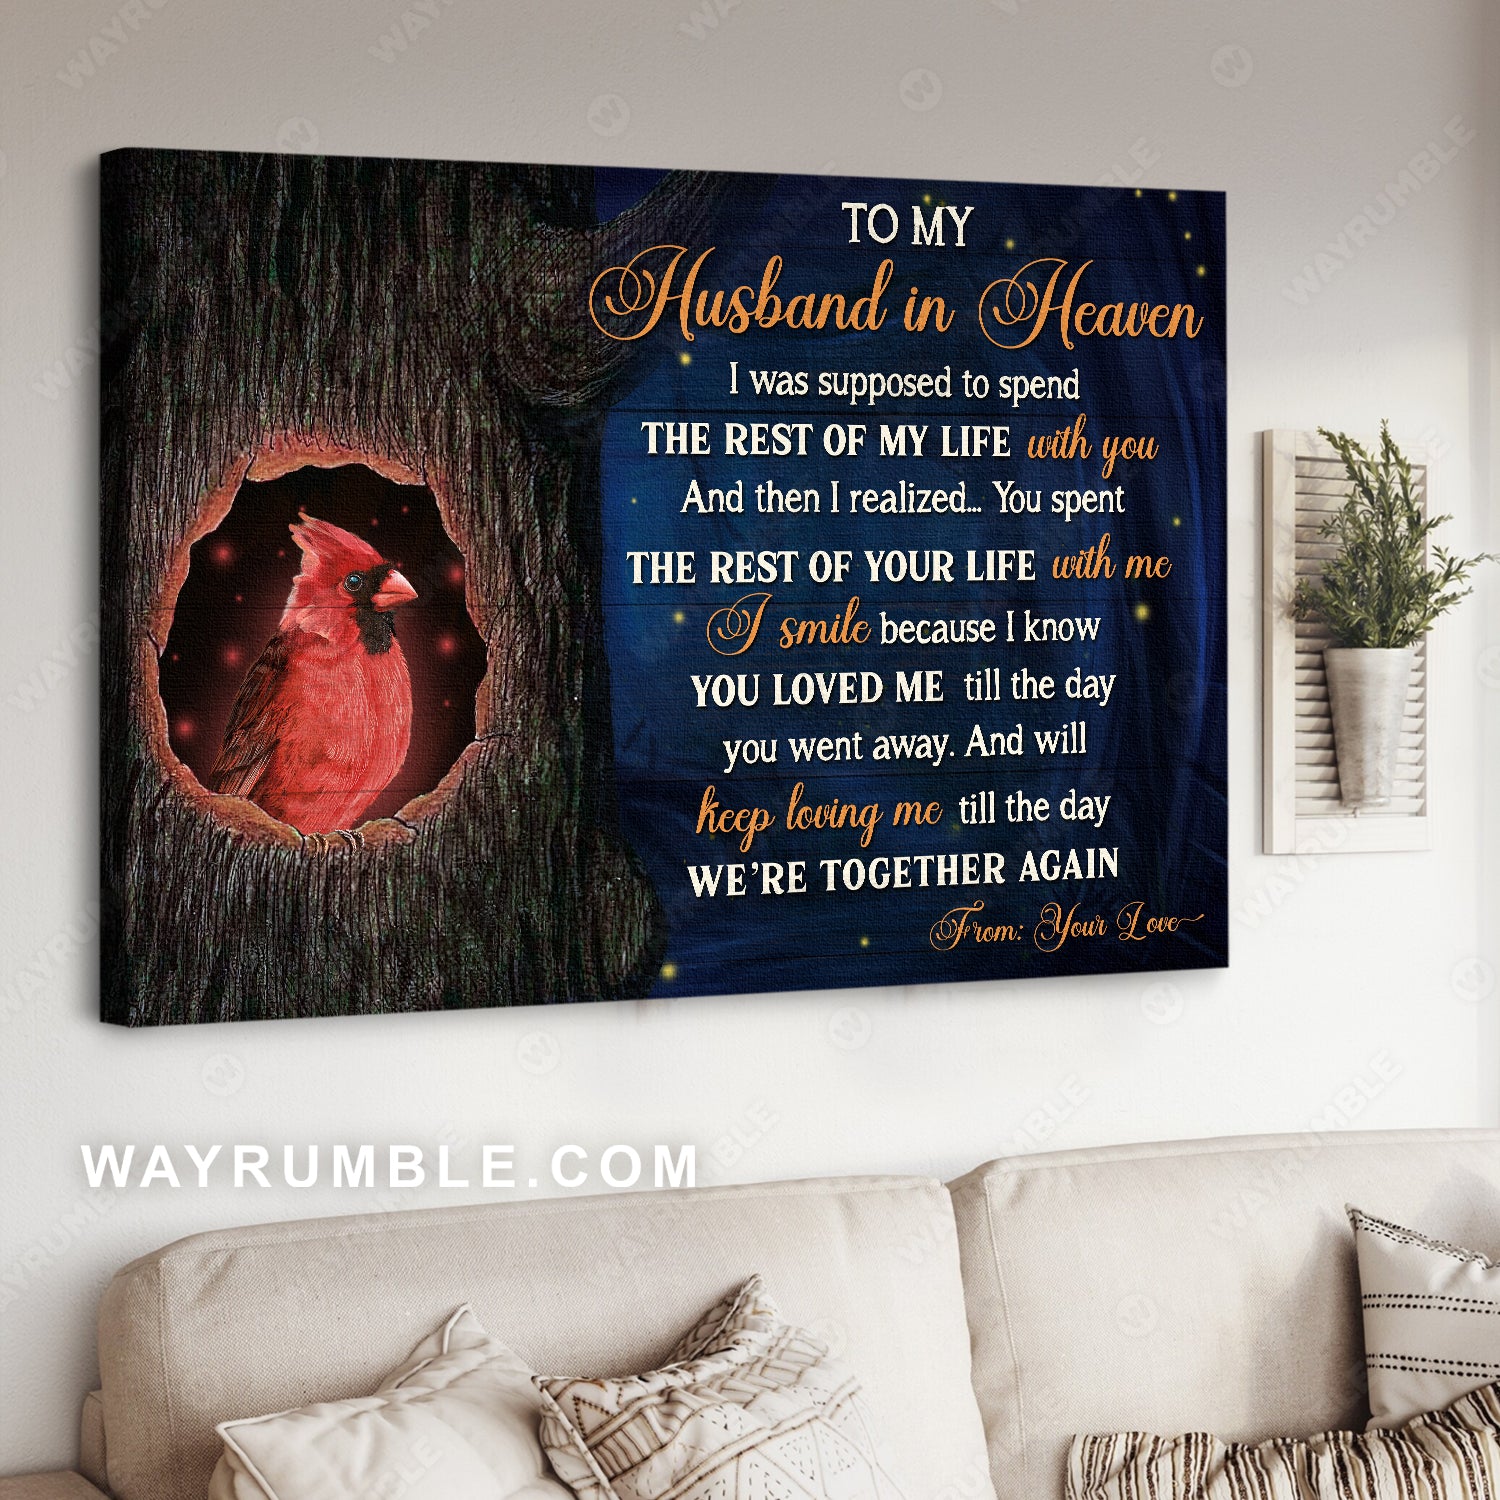 To my husband in Heaven, Keep loving me till we're together again  - Cardinal, Heaven Landscape Canvas Prints, Wall Art